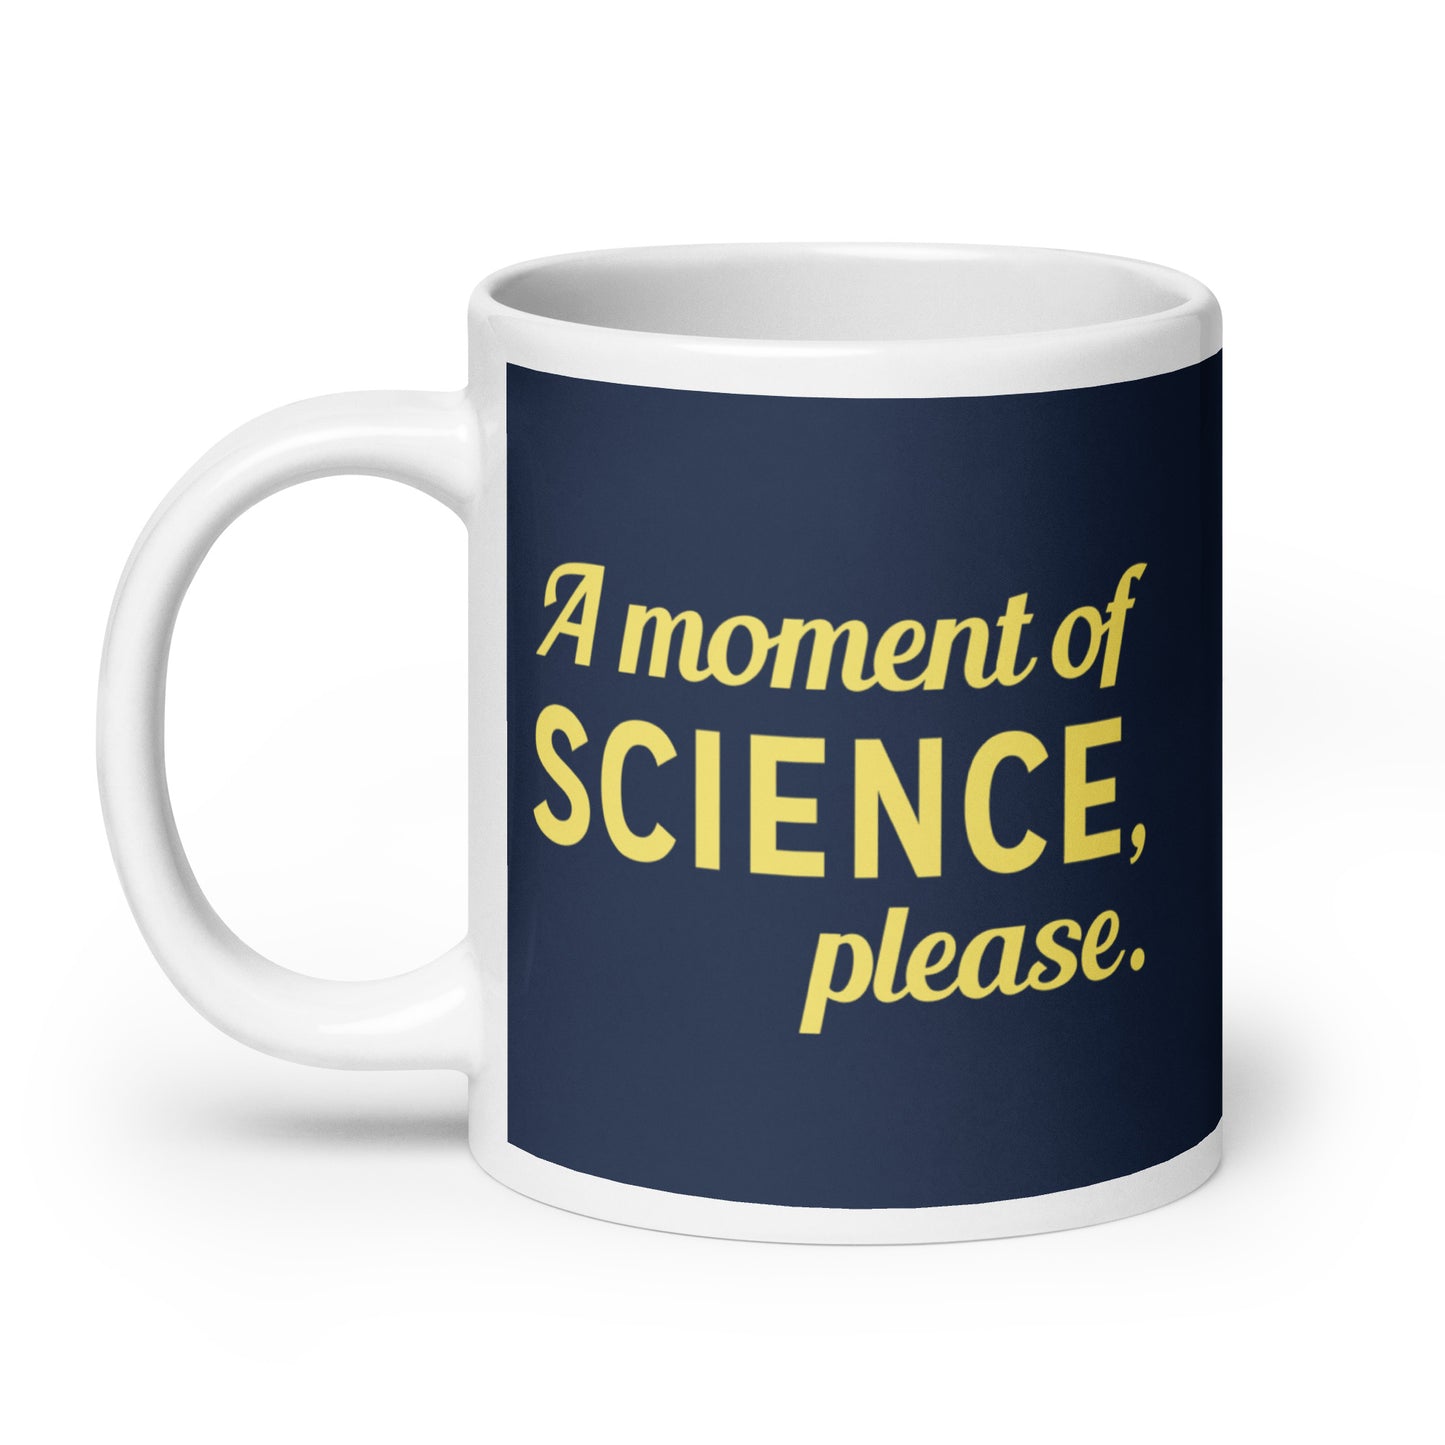 A Moment of Science, Please Mug